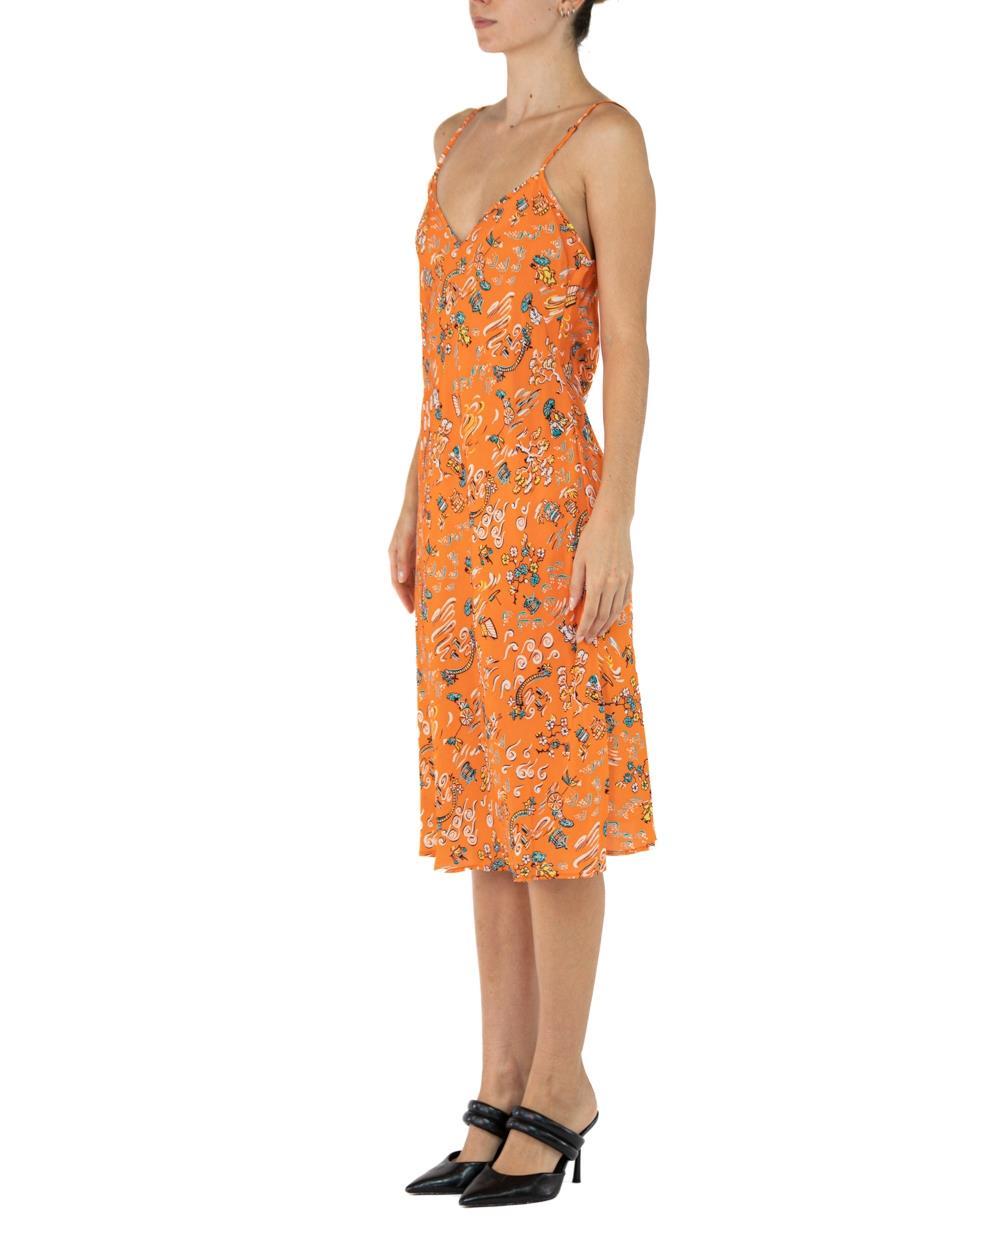 Women's Morphew Collection Orange & Green Cherry Blossom Novelty Print Cold Rayon Bias  For Sale